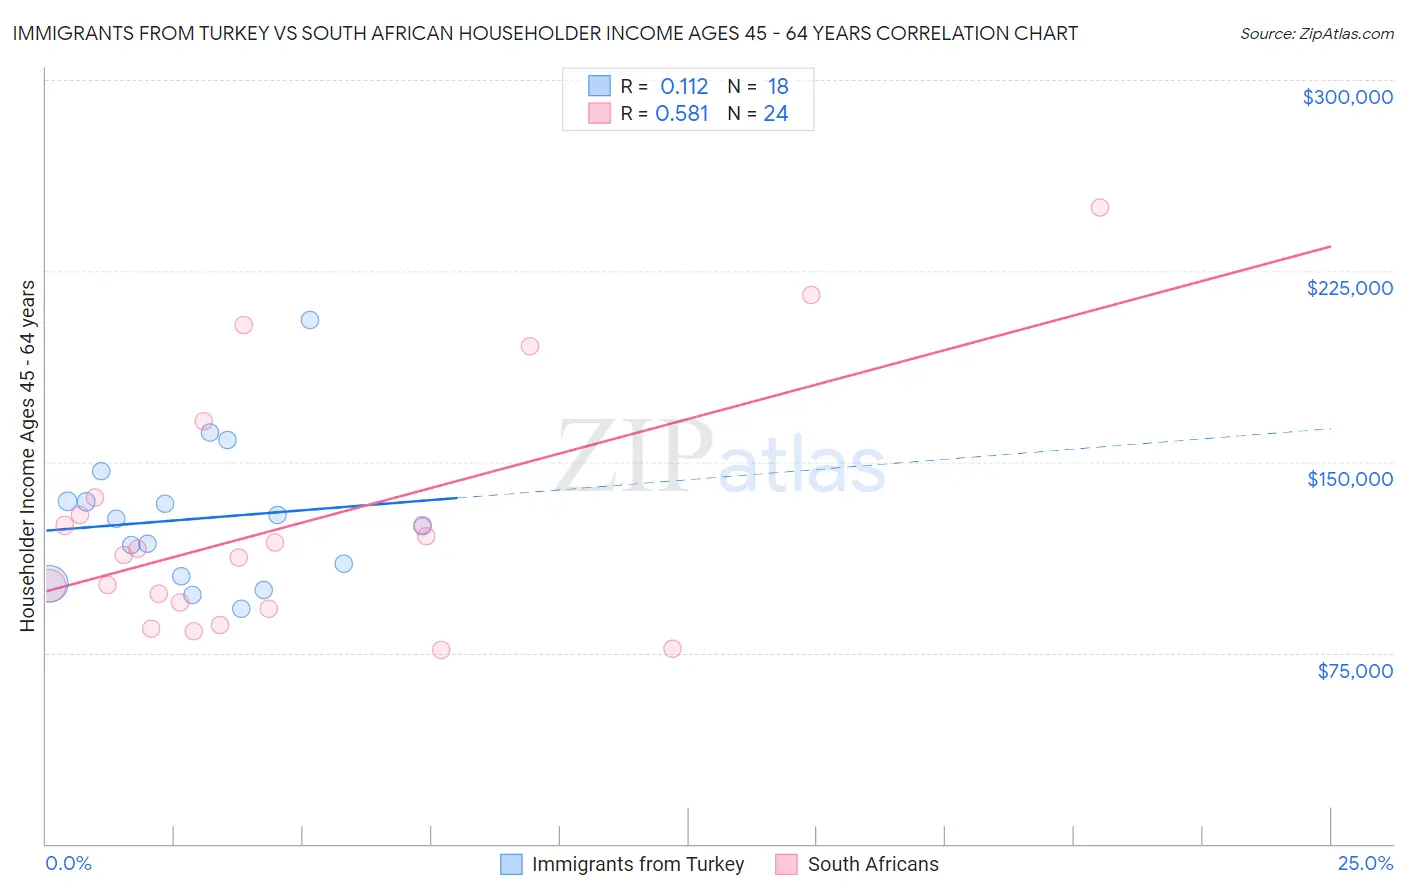 Immigrants from Turkey vs South African Householder Income Ages 45 - 64 years